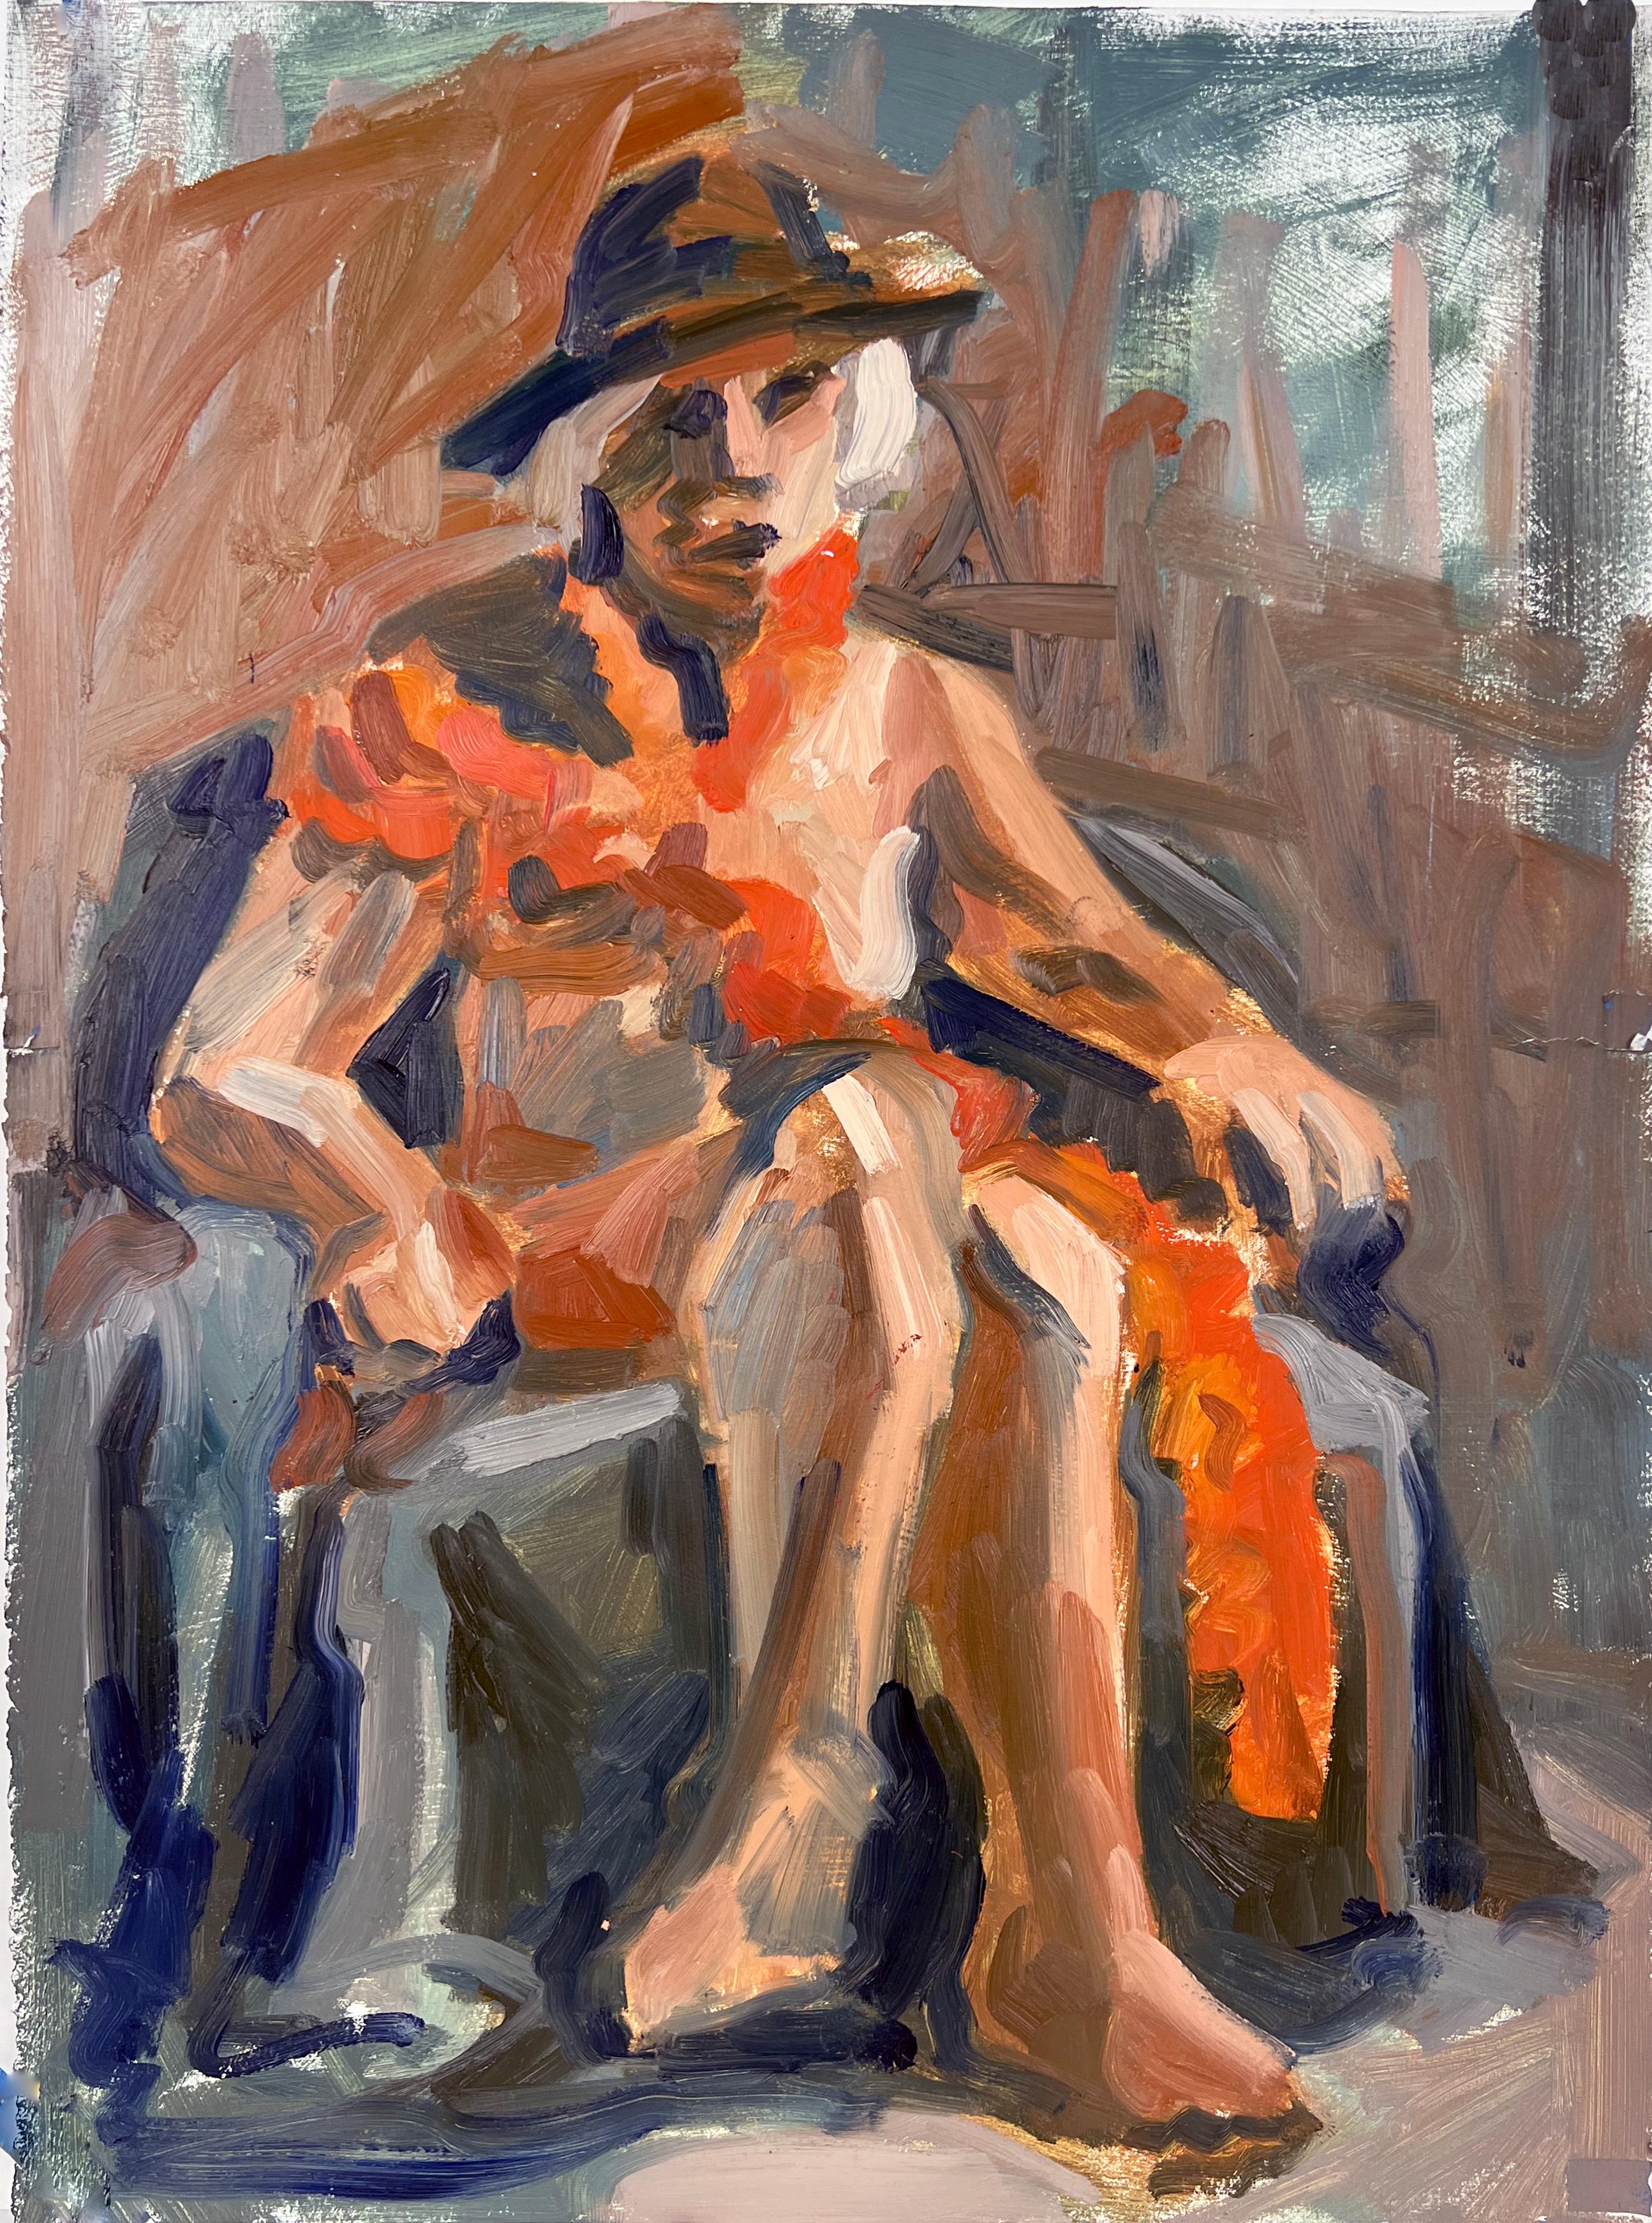 Figurative Painting Heather Speck - Femme nue assise Bay Area Figurative School Abstract Expressionist